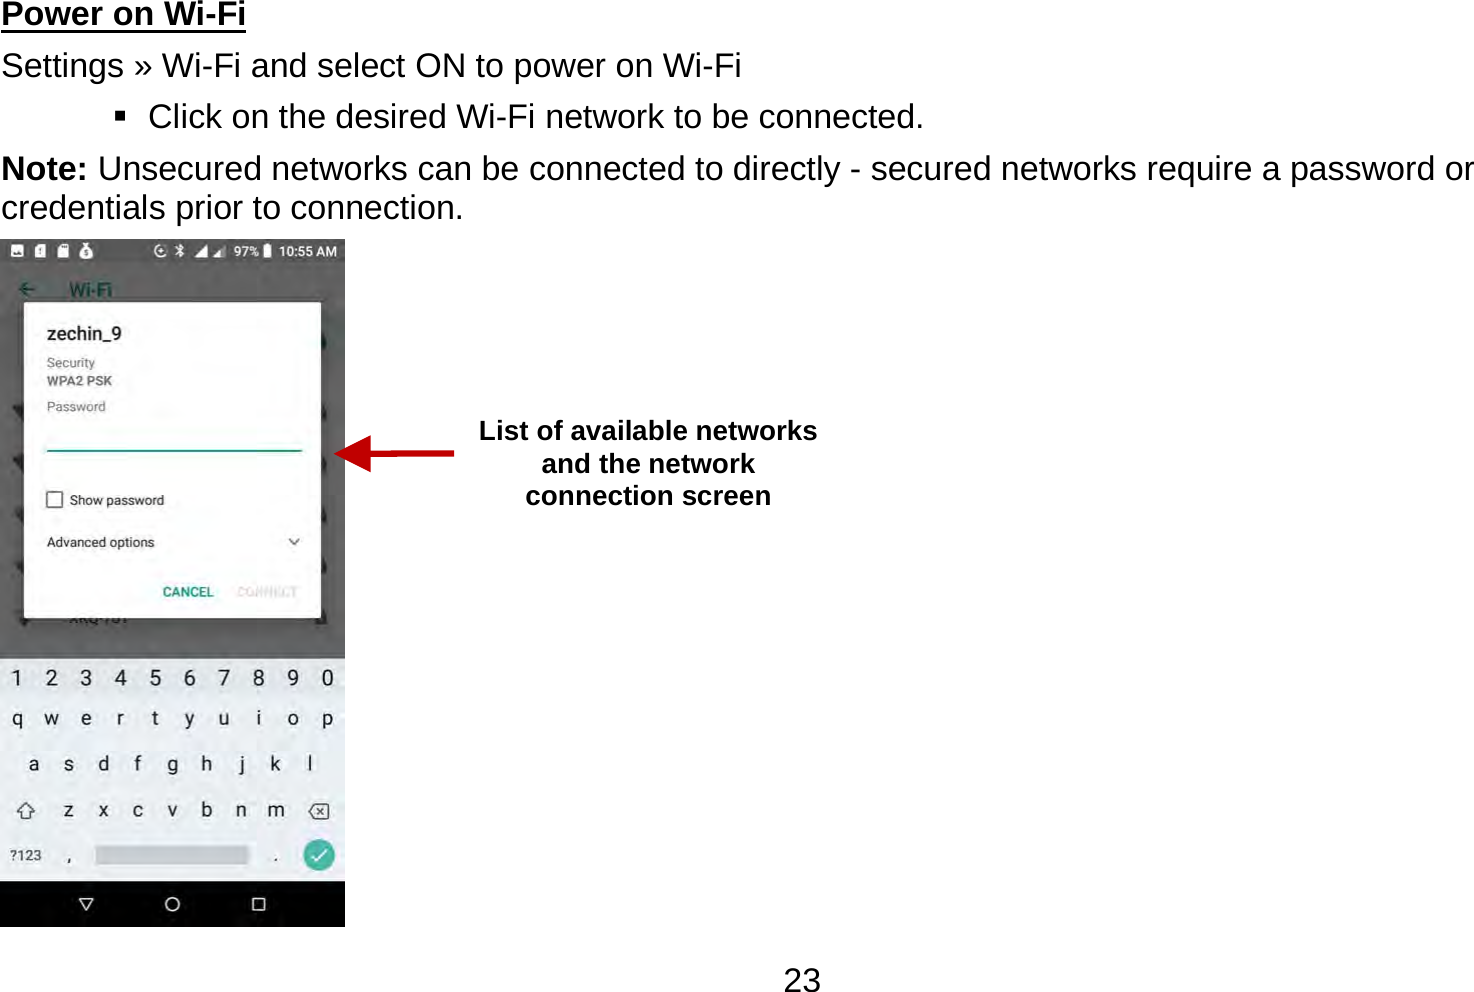   23Power on Wi-Fi                                                                                 Settings » Wi-Fi and select ON to power on Wi-Fi    Click on the desired Wi-Fi network to be connected.                 Note: Unsecured networks can be connected to directly - secured networks require a password or credentials prior to connection.  List of available networks and the network connection screen 